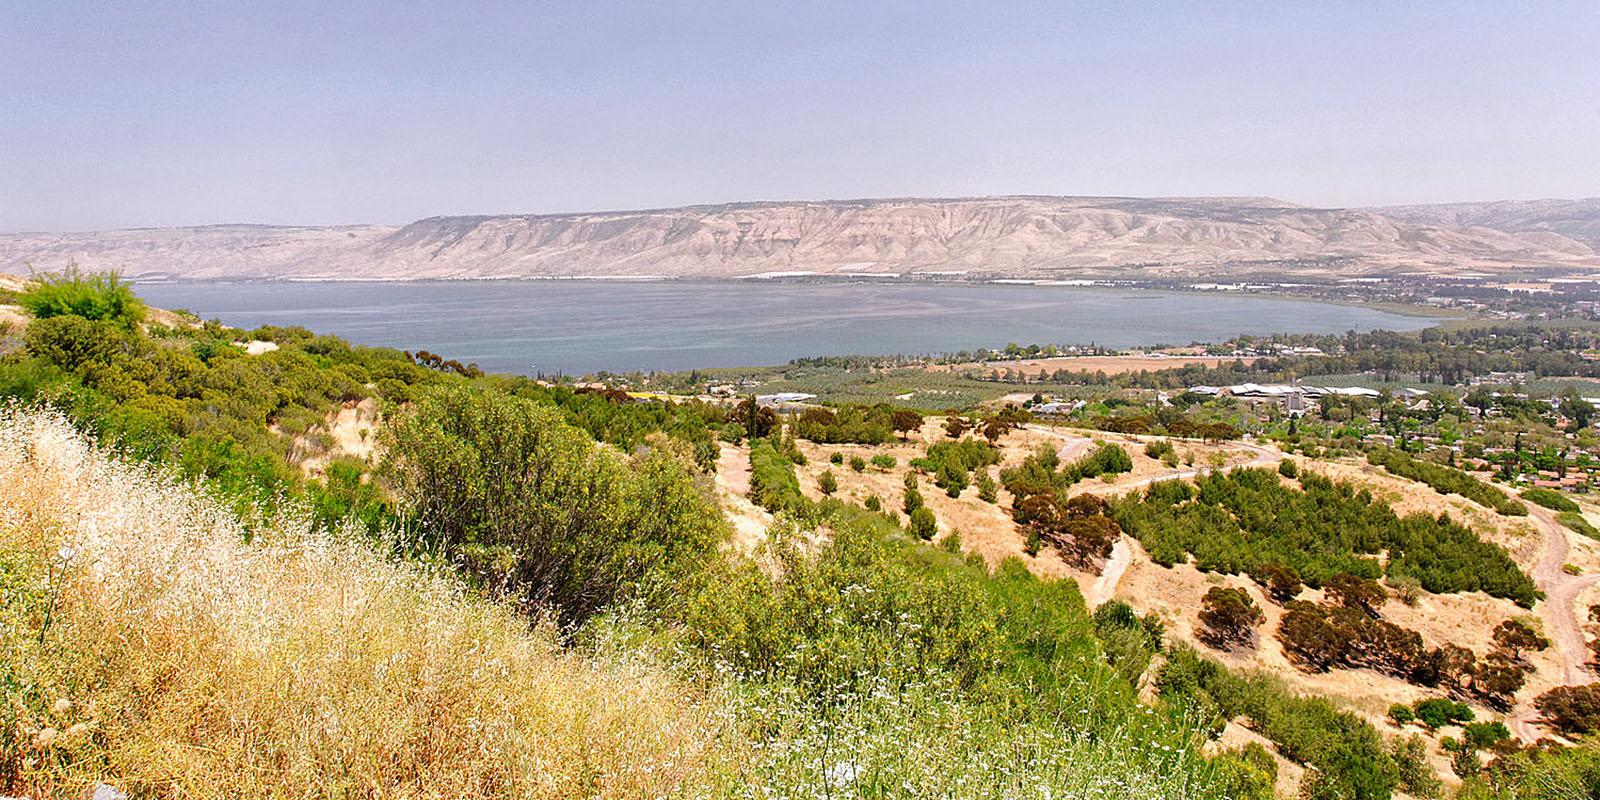 The Sea of Galilee and the Golan Heights